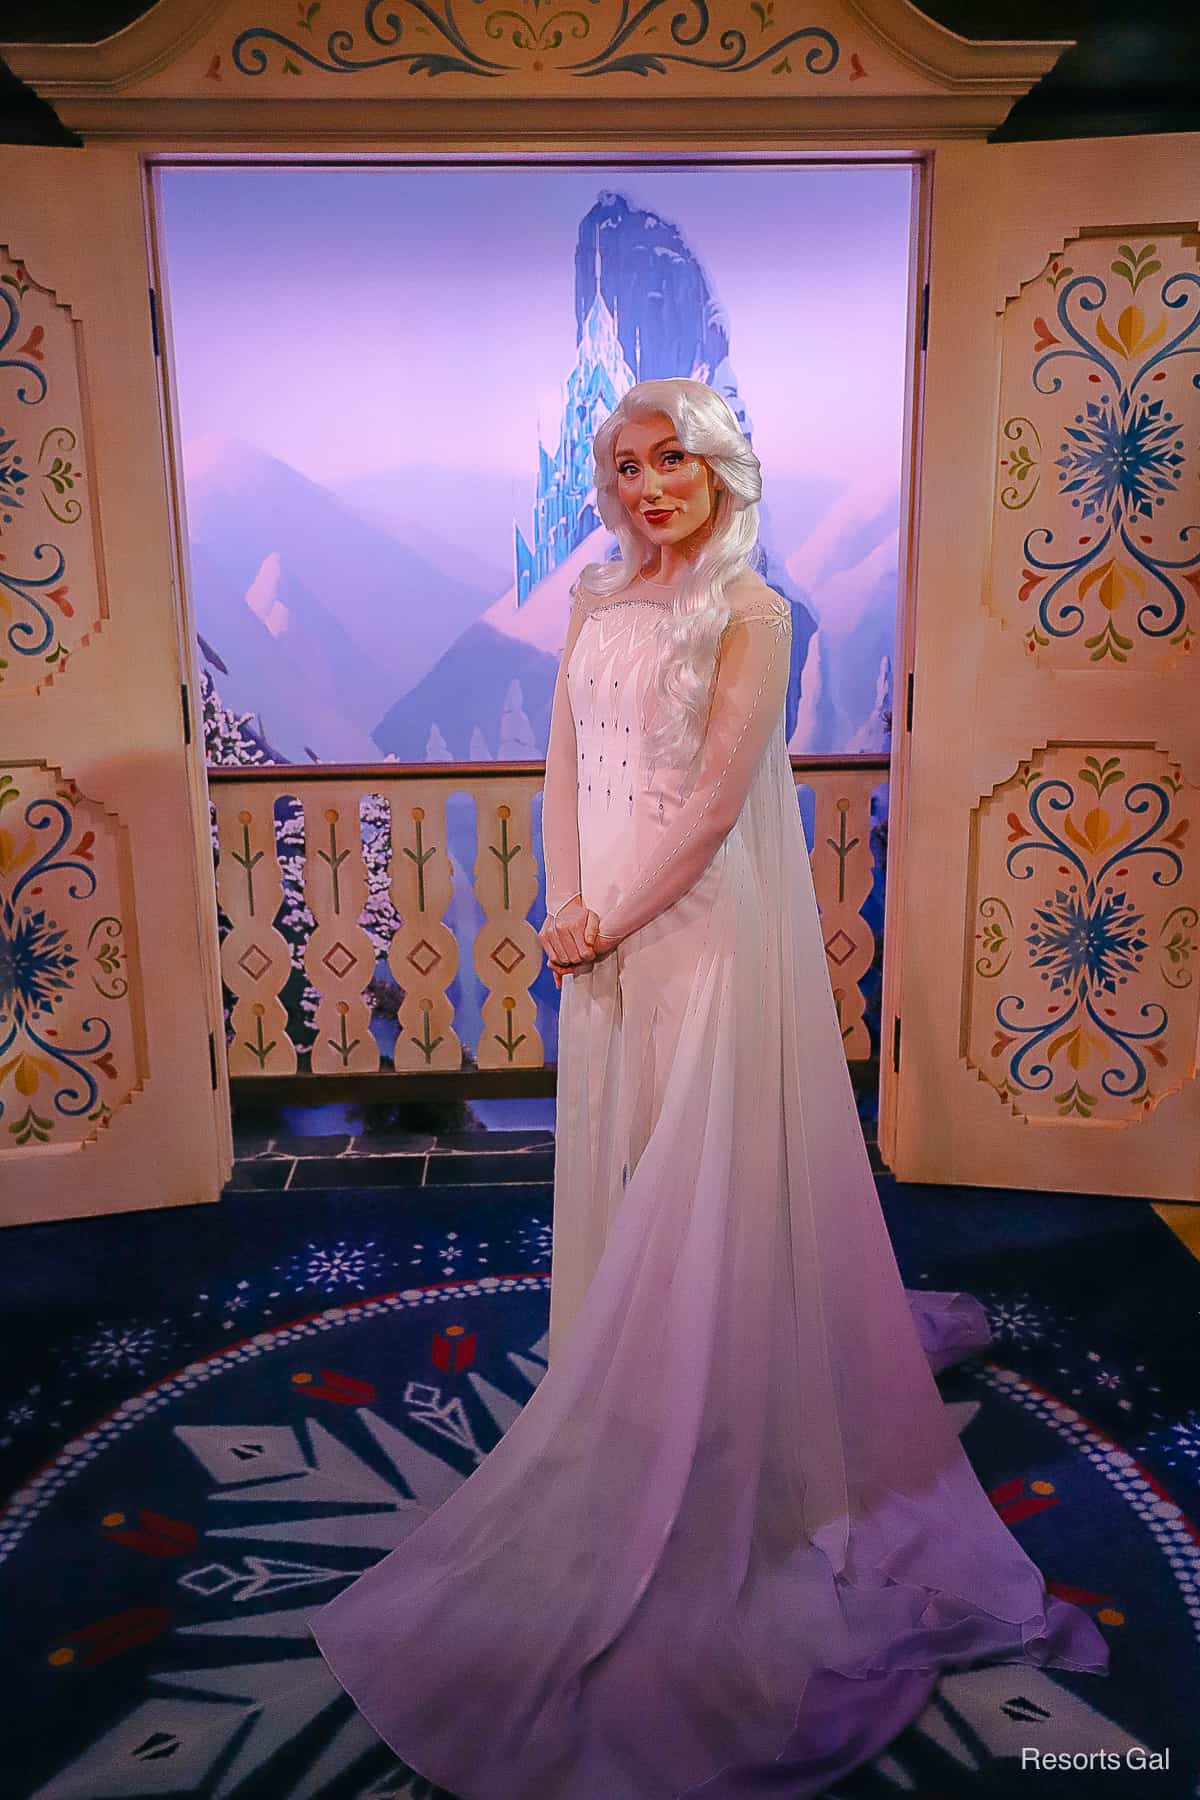 Elsa poses with her hands folded wearing her white gown. 